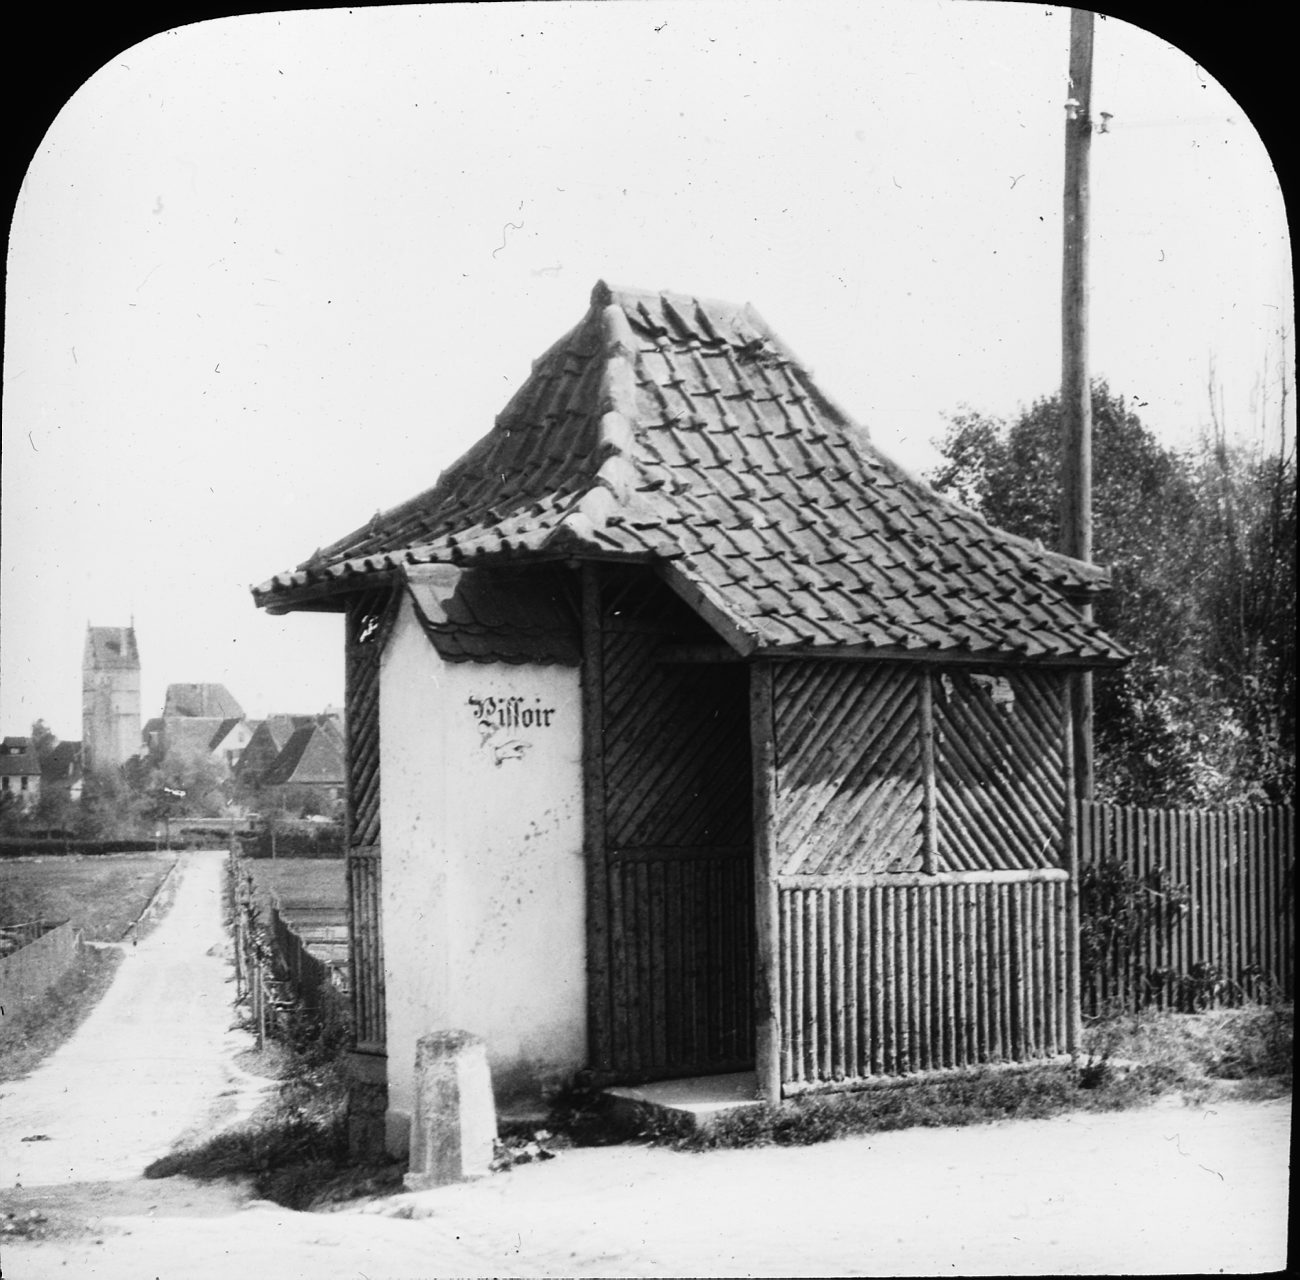 an old black and white po of a small hut